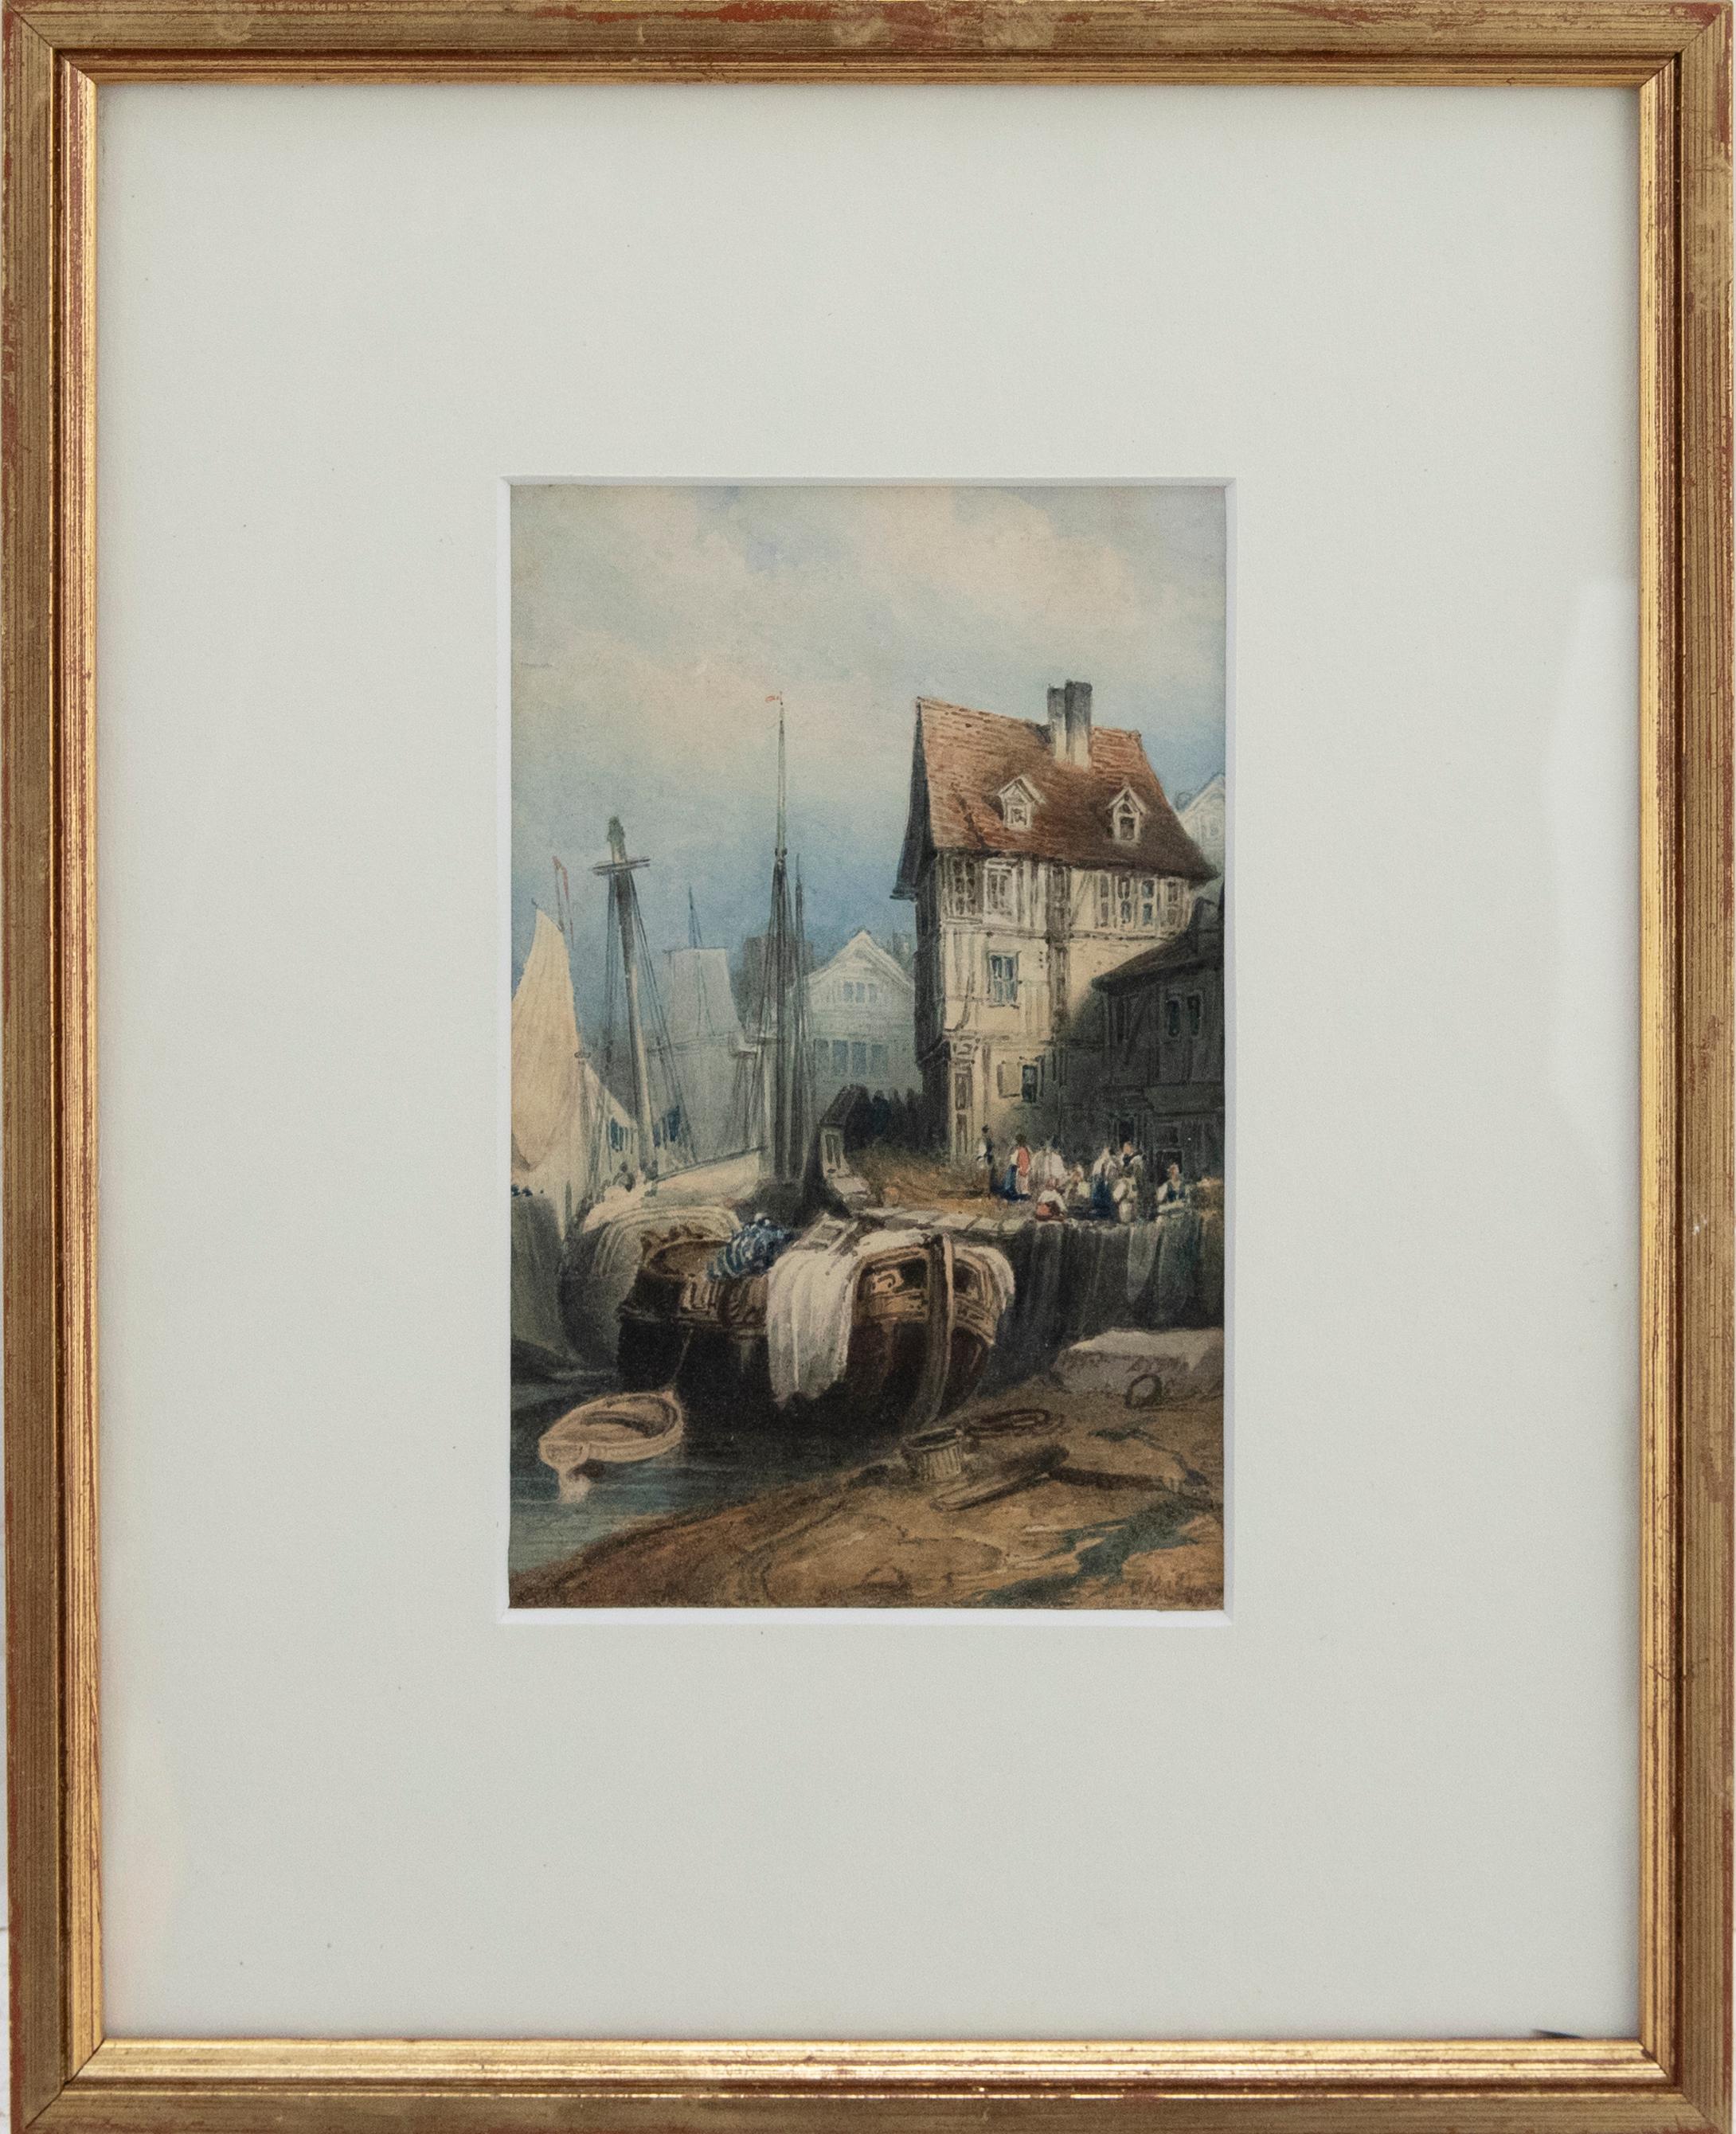 A charming watercolour scene of ships moored inside a port with figures and buildings on the right-hand side. Unsigned. Well-presented in an elegant gilt frame with a new card mount. Fixed to the reverse of the frame is a receipt of purchase from